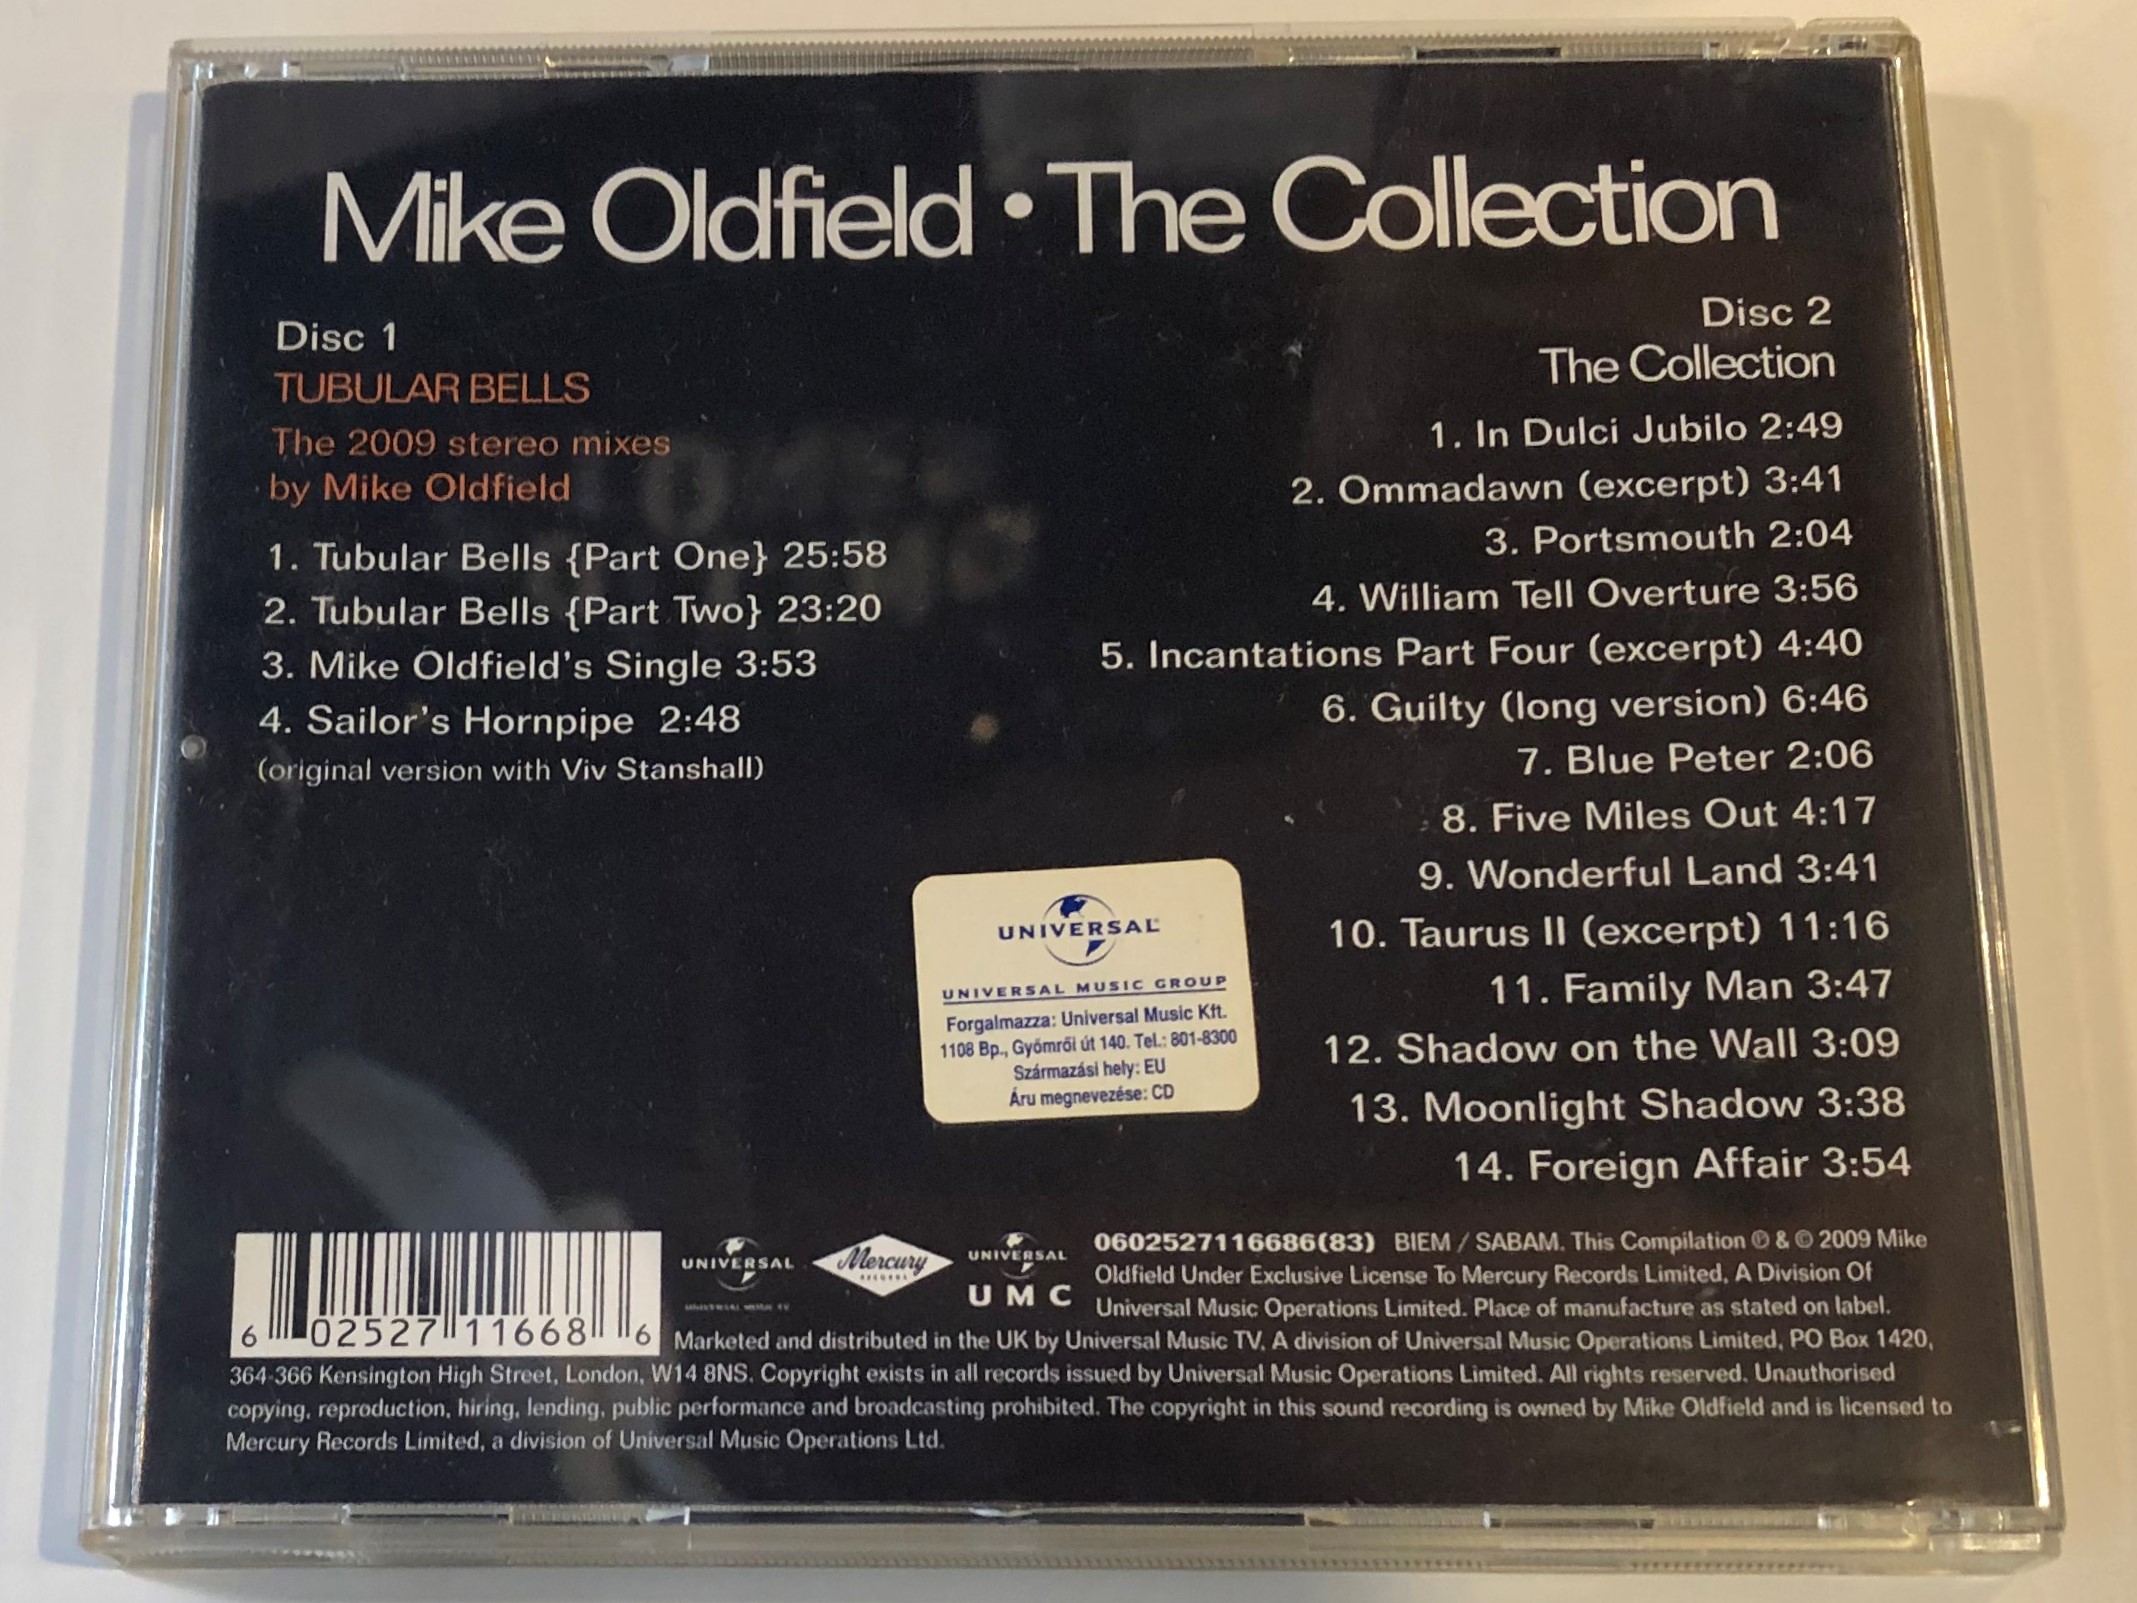 mike-oldfield-the-collection-tubular-bells-ommadawn-in-dulci-jubilo-portsmouth-blue-peter-moonlight-shadow-foreign-affair-william-tell-overture-made-for-hungary-mercury-2x-audio-c.jpg